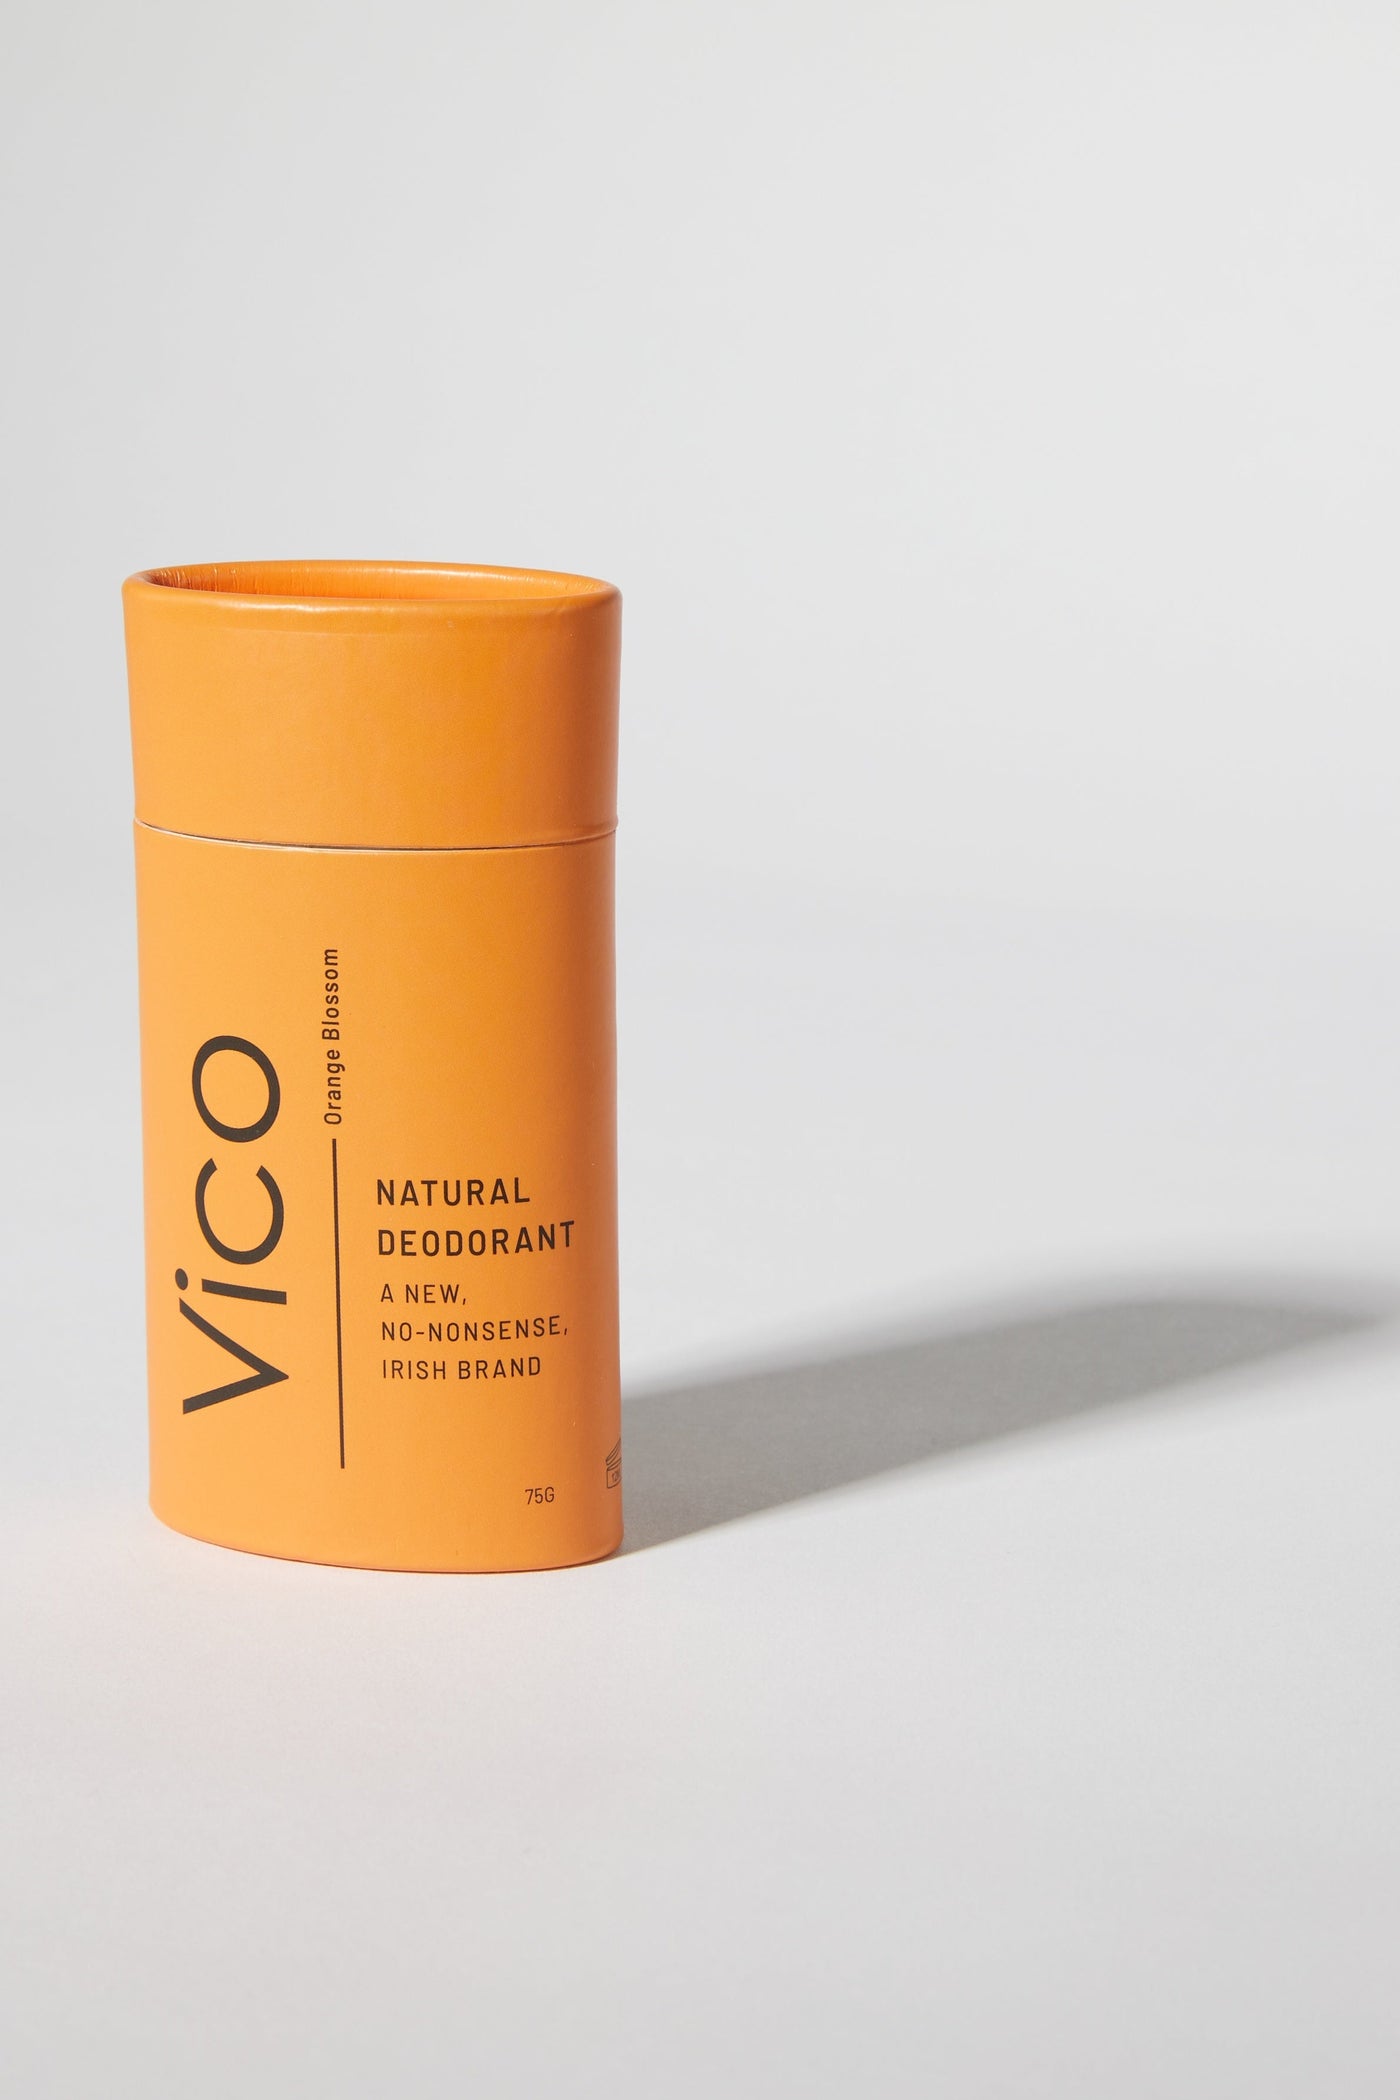 Vico Orange Blossom Natural Deodorant-Women-Ohh! By Gum - Shop Sustainable